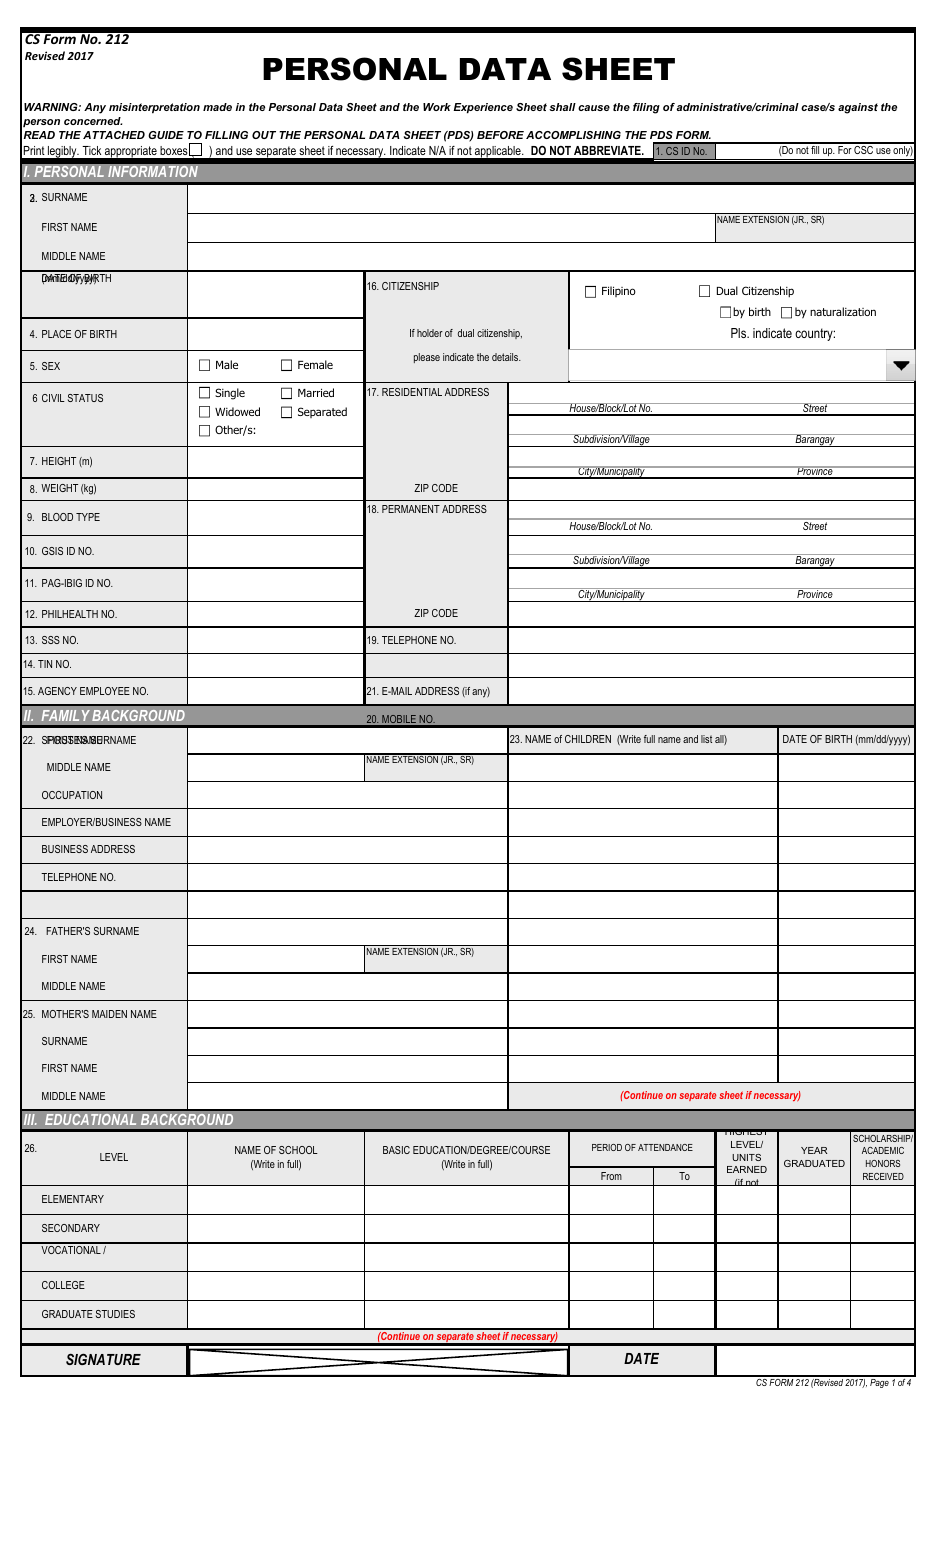 CS Form 212 Personal Data Sheet - Philippines, Page 1